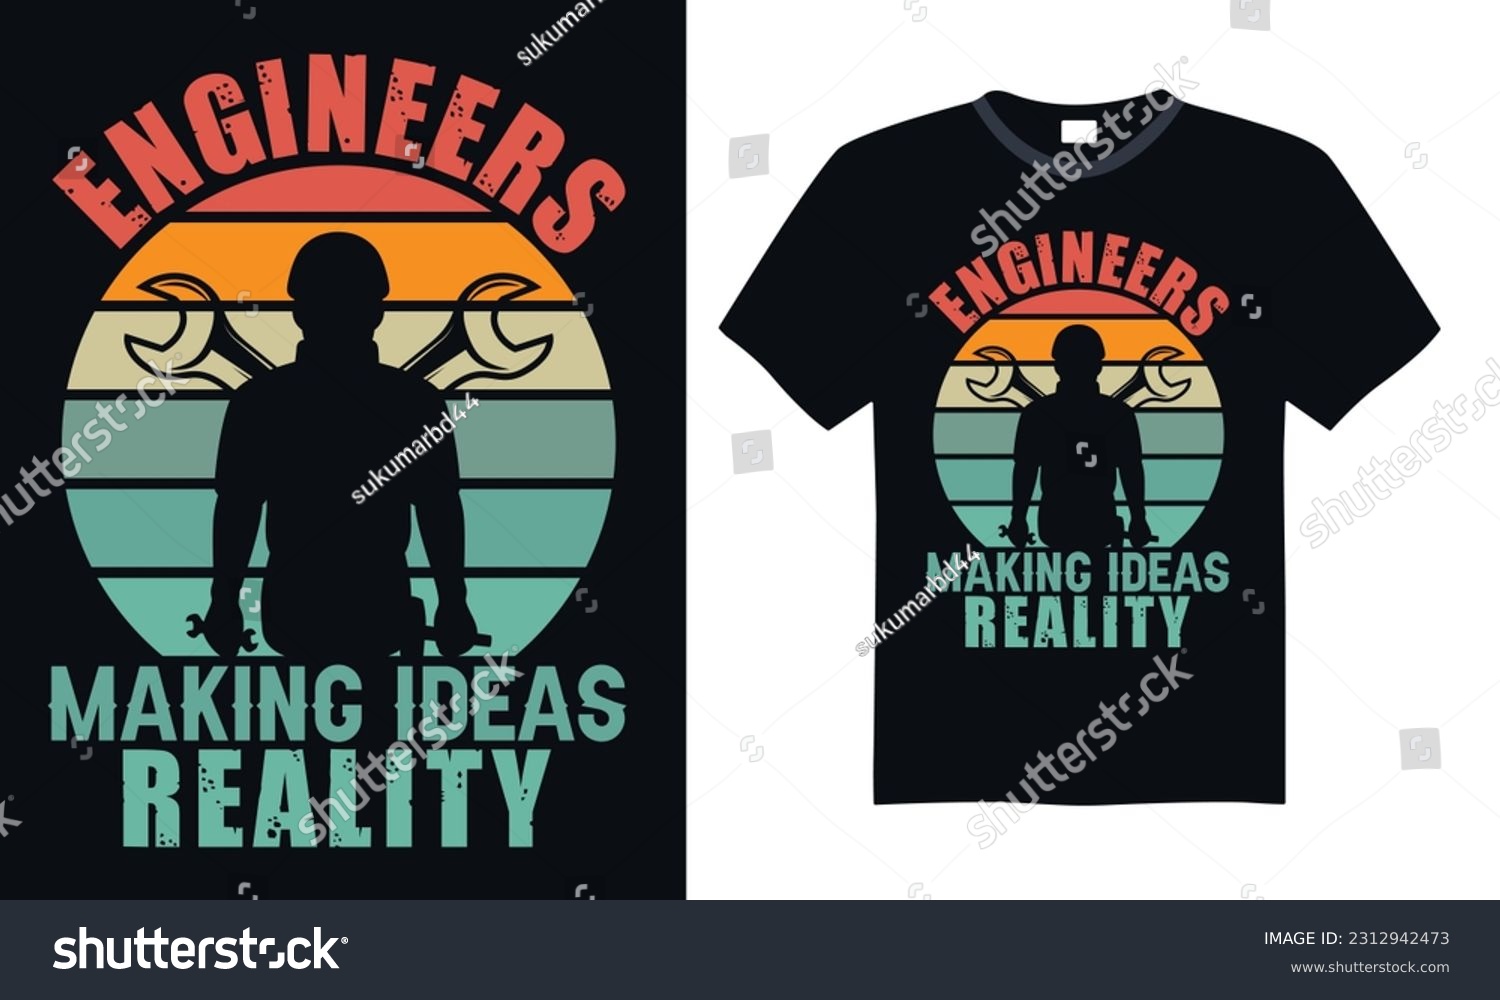 SVG of Engineers Making Ideas Reality - Engineering T-shirt Design, SVG Files for Cutting, Handmade calligraphy vector illustration, Hand written vector sign svg